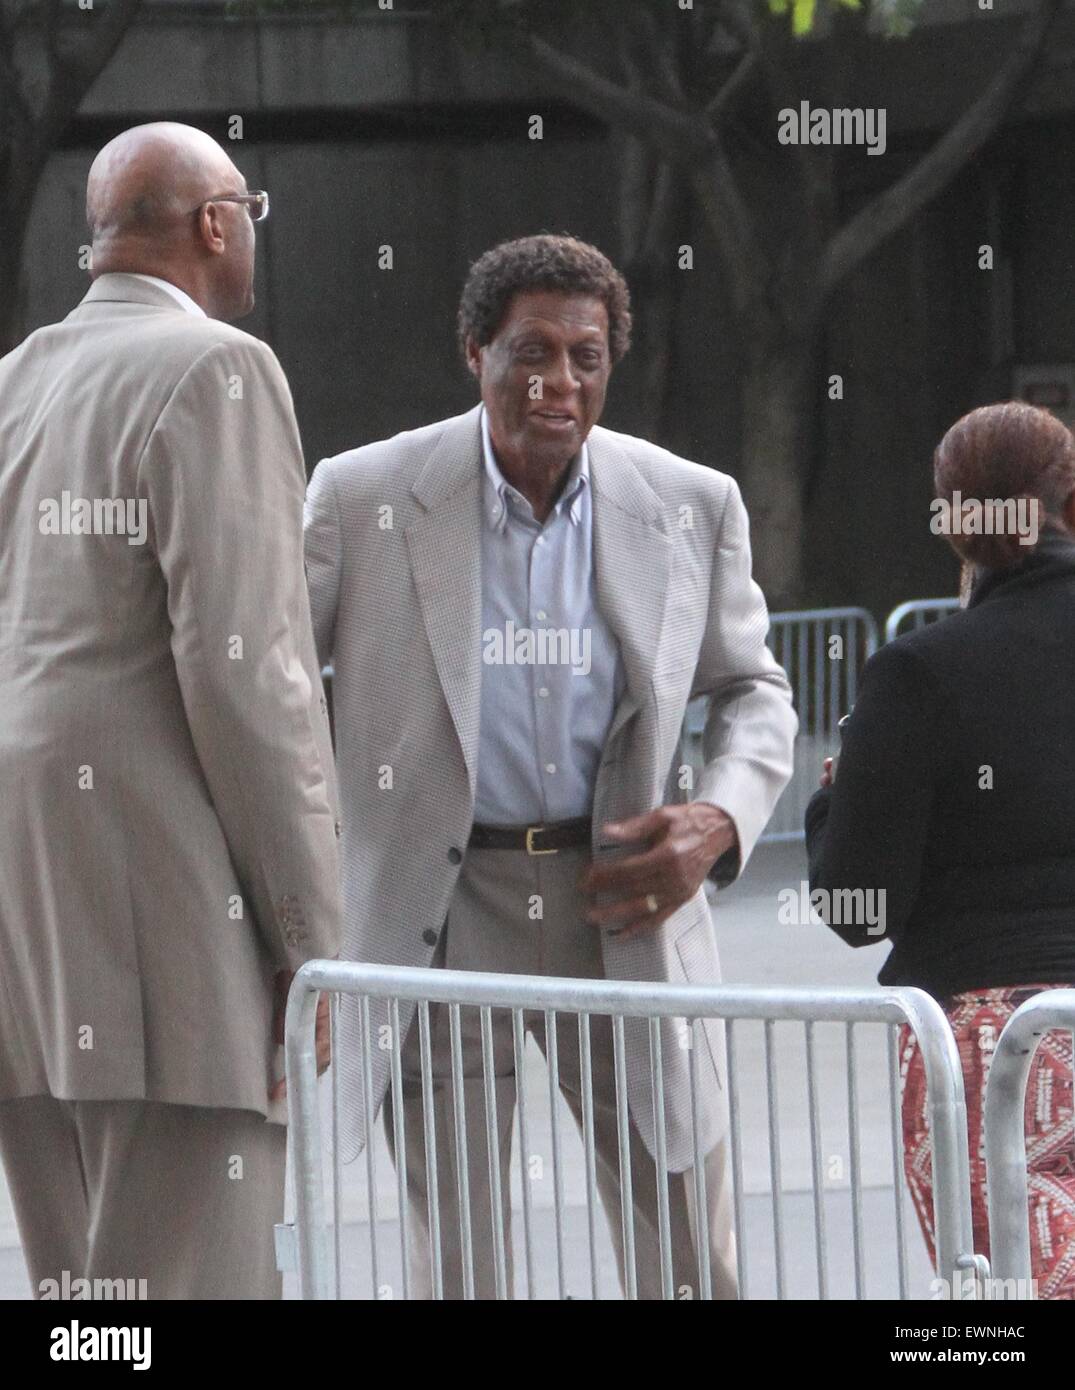 Celebrities arriving at the Staples Center for the Los Angeles Clippers v San Antonio Spurs NBA Western Conference playoff game  Featuring: Elgin Baylor Where: Los Angeles, California, United States When: 22 Apr 2015 Stock Photo